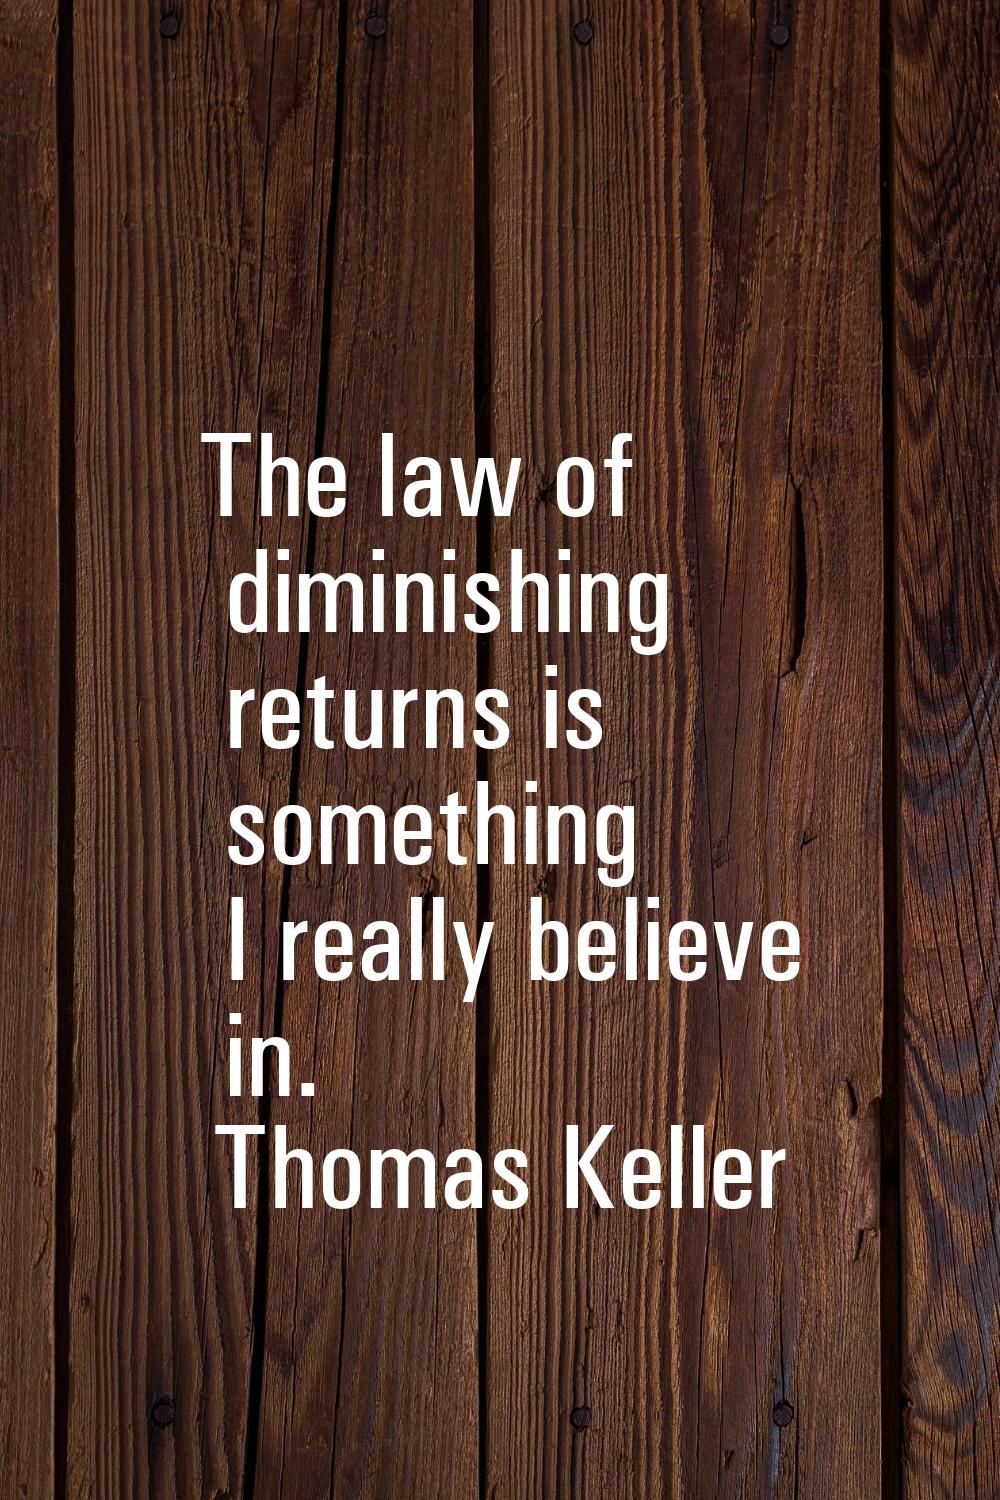 The law of diminishing returns is something I really believe in.